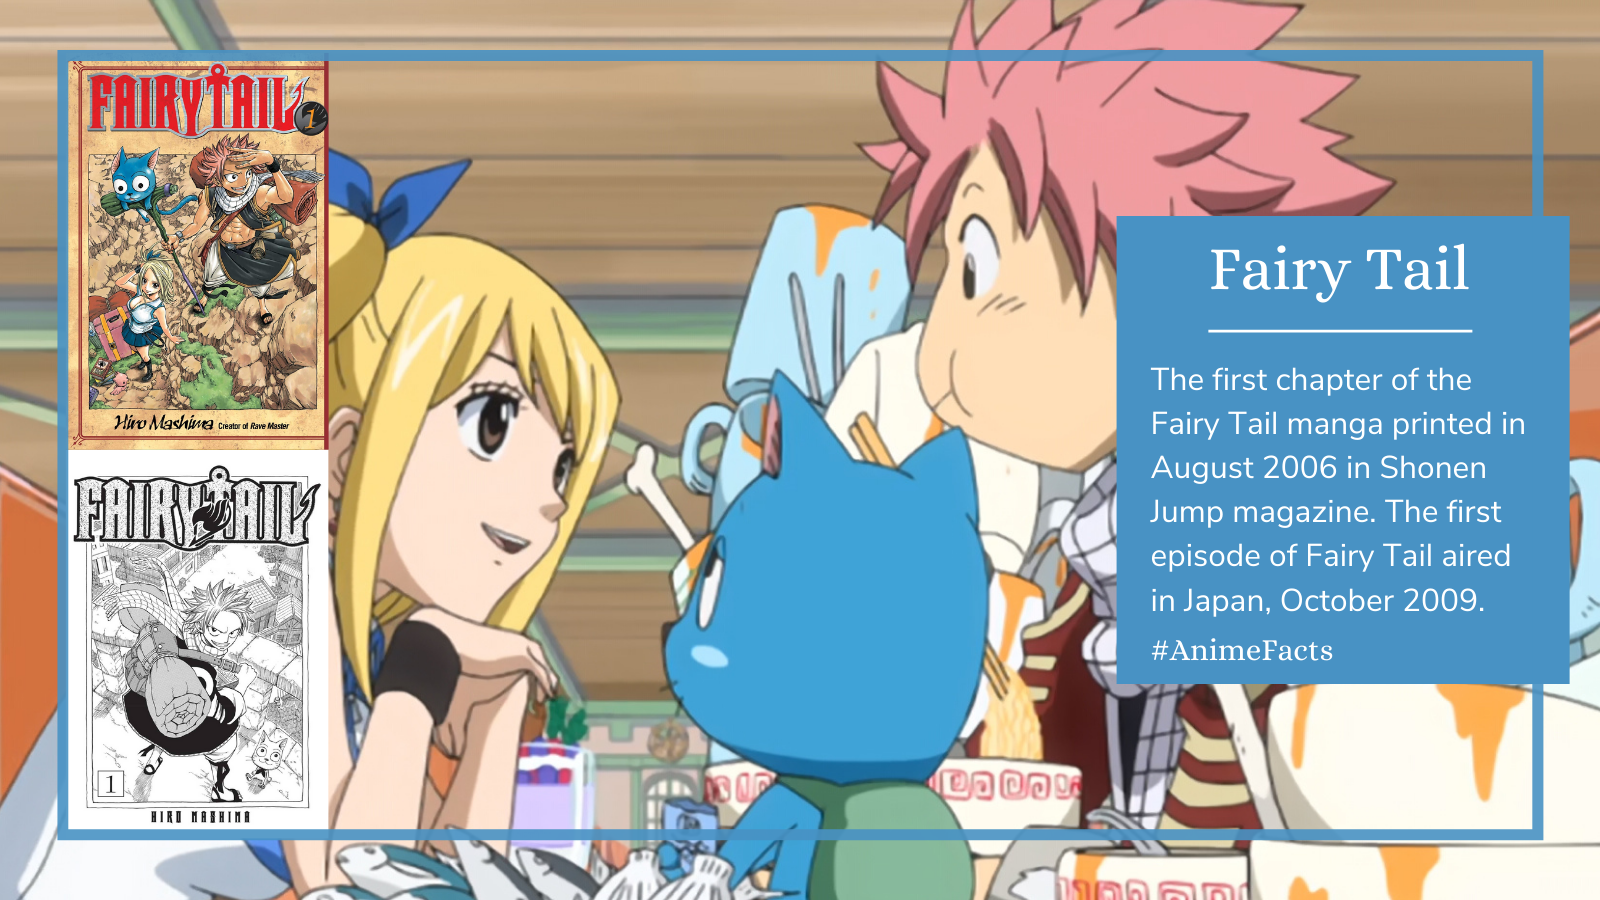 10 Fun Fairy Tail Facts – All About Anime and Manga